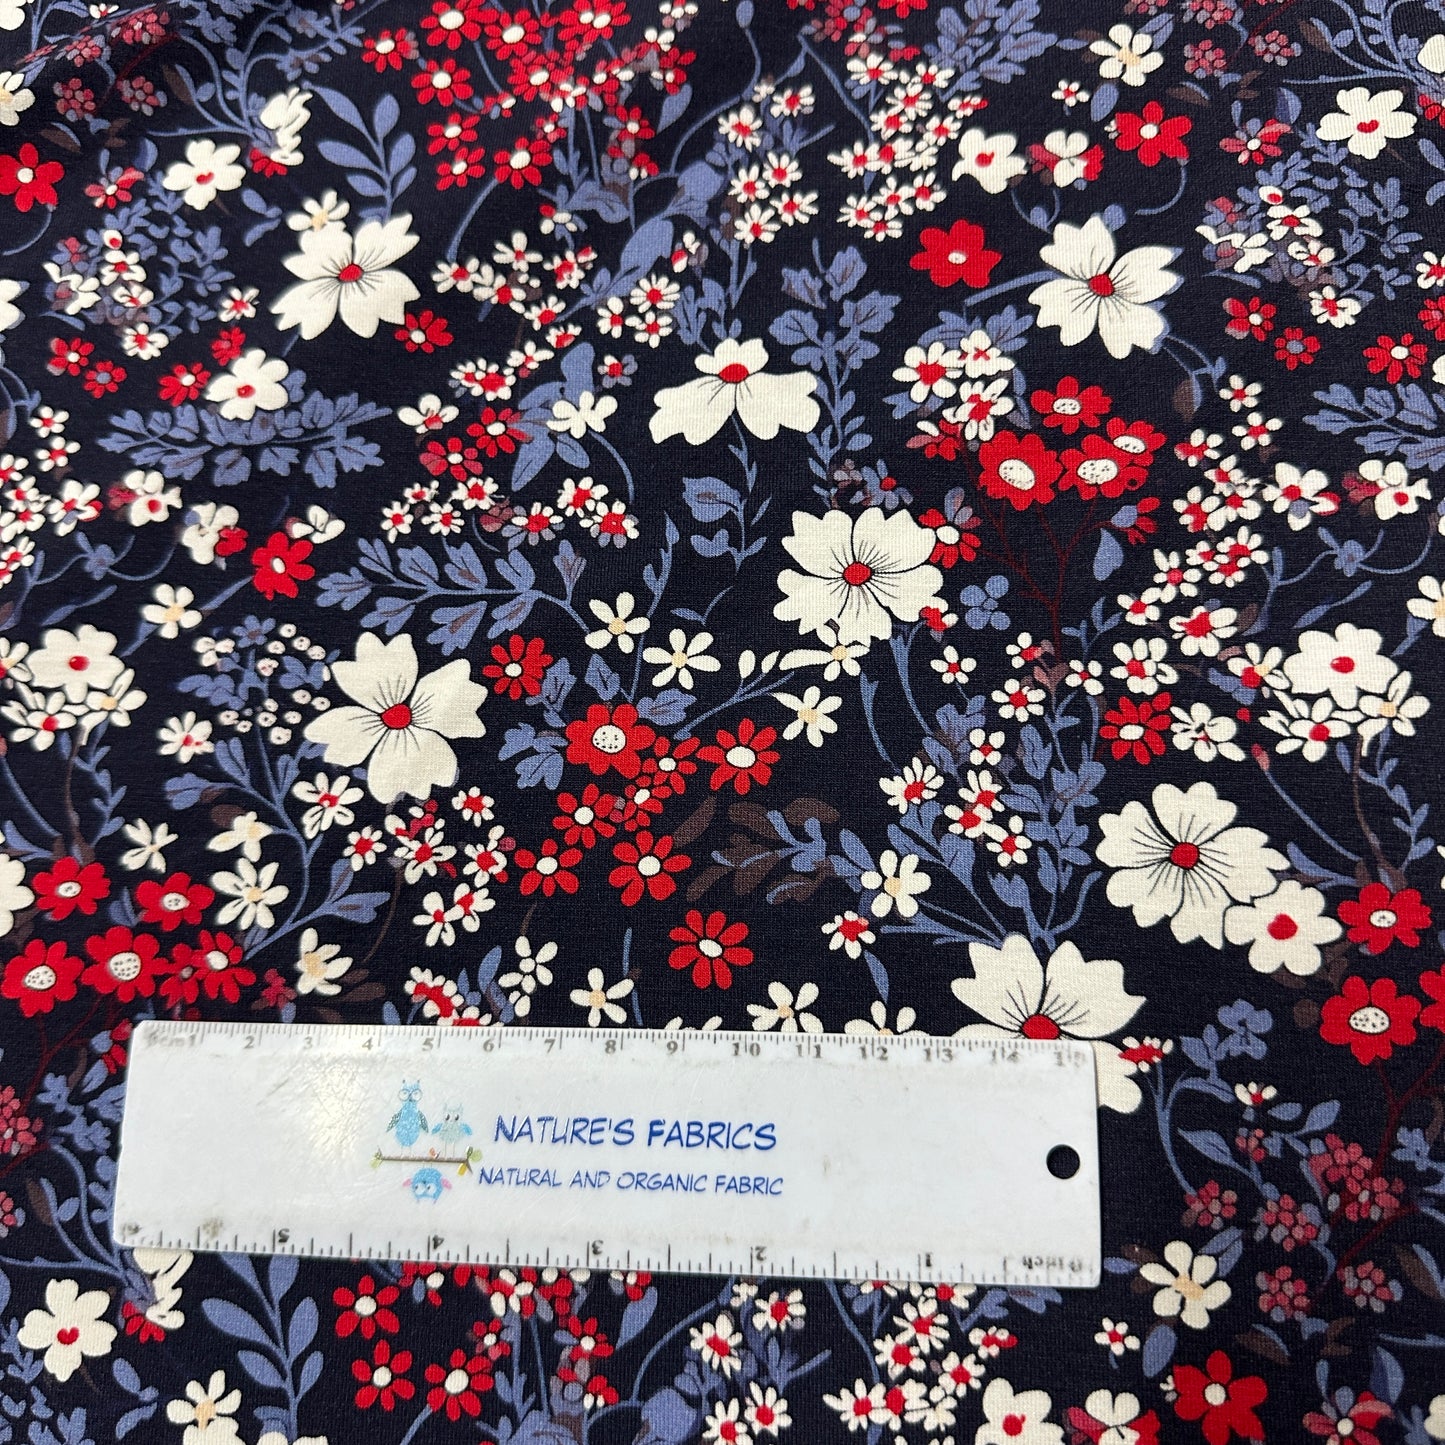 Red, White and Blue Floral on Organic Cotton/Spandex Jersey Fabric